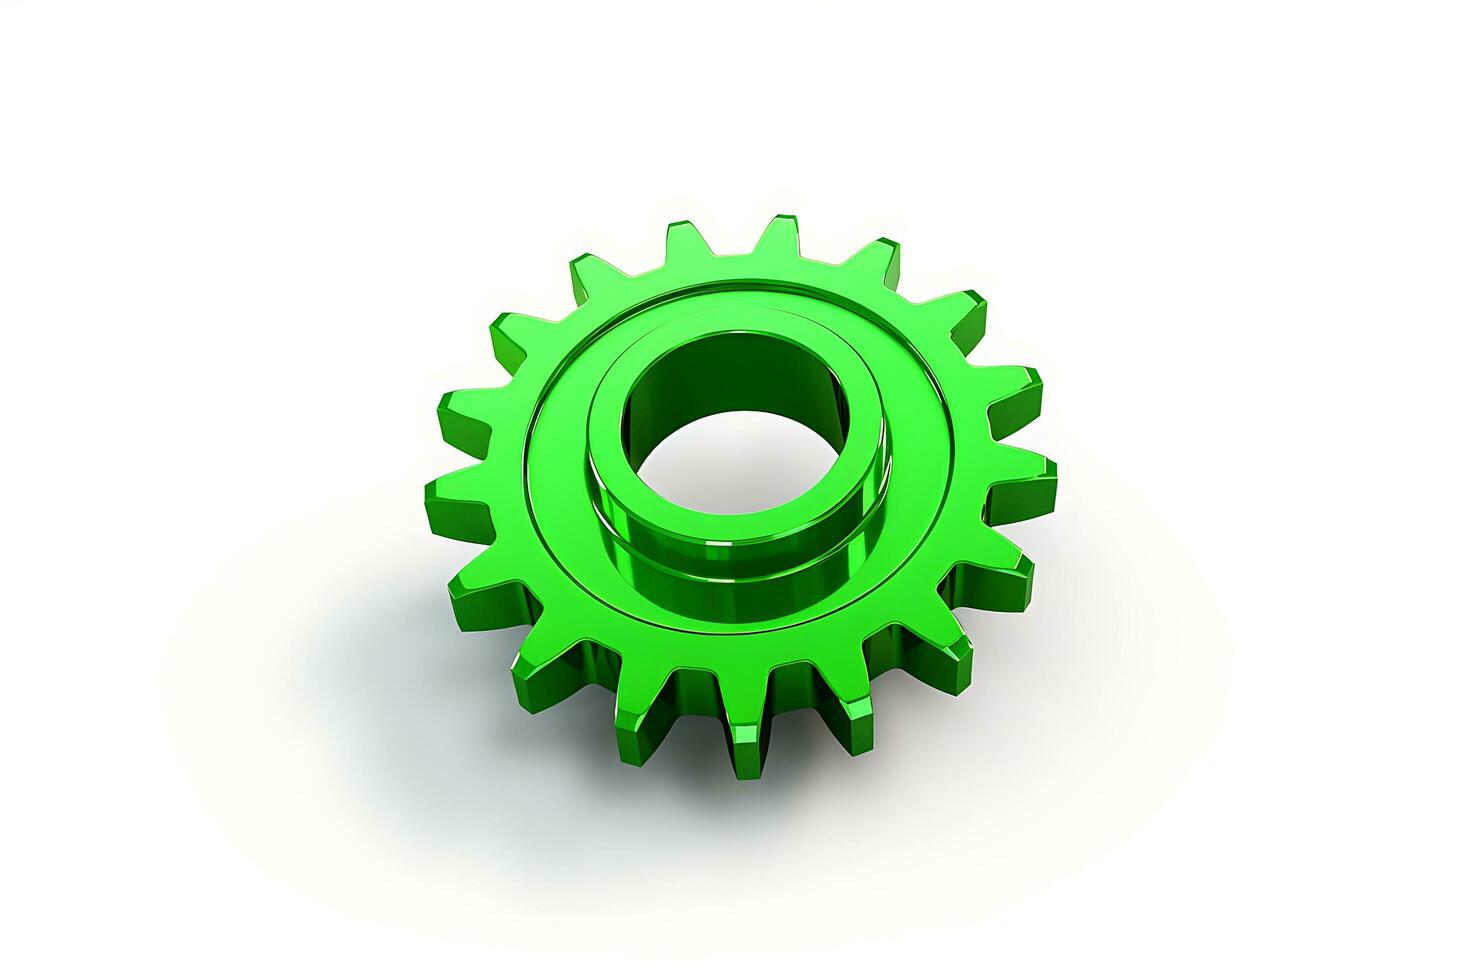 3d green gear icon on white background photo